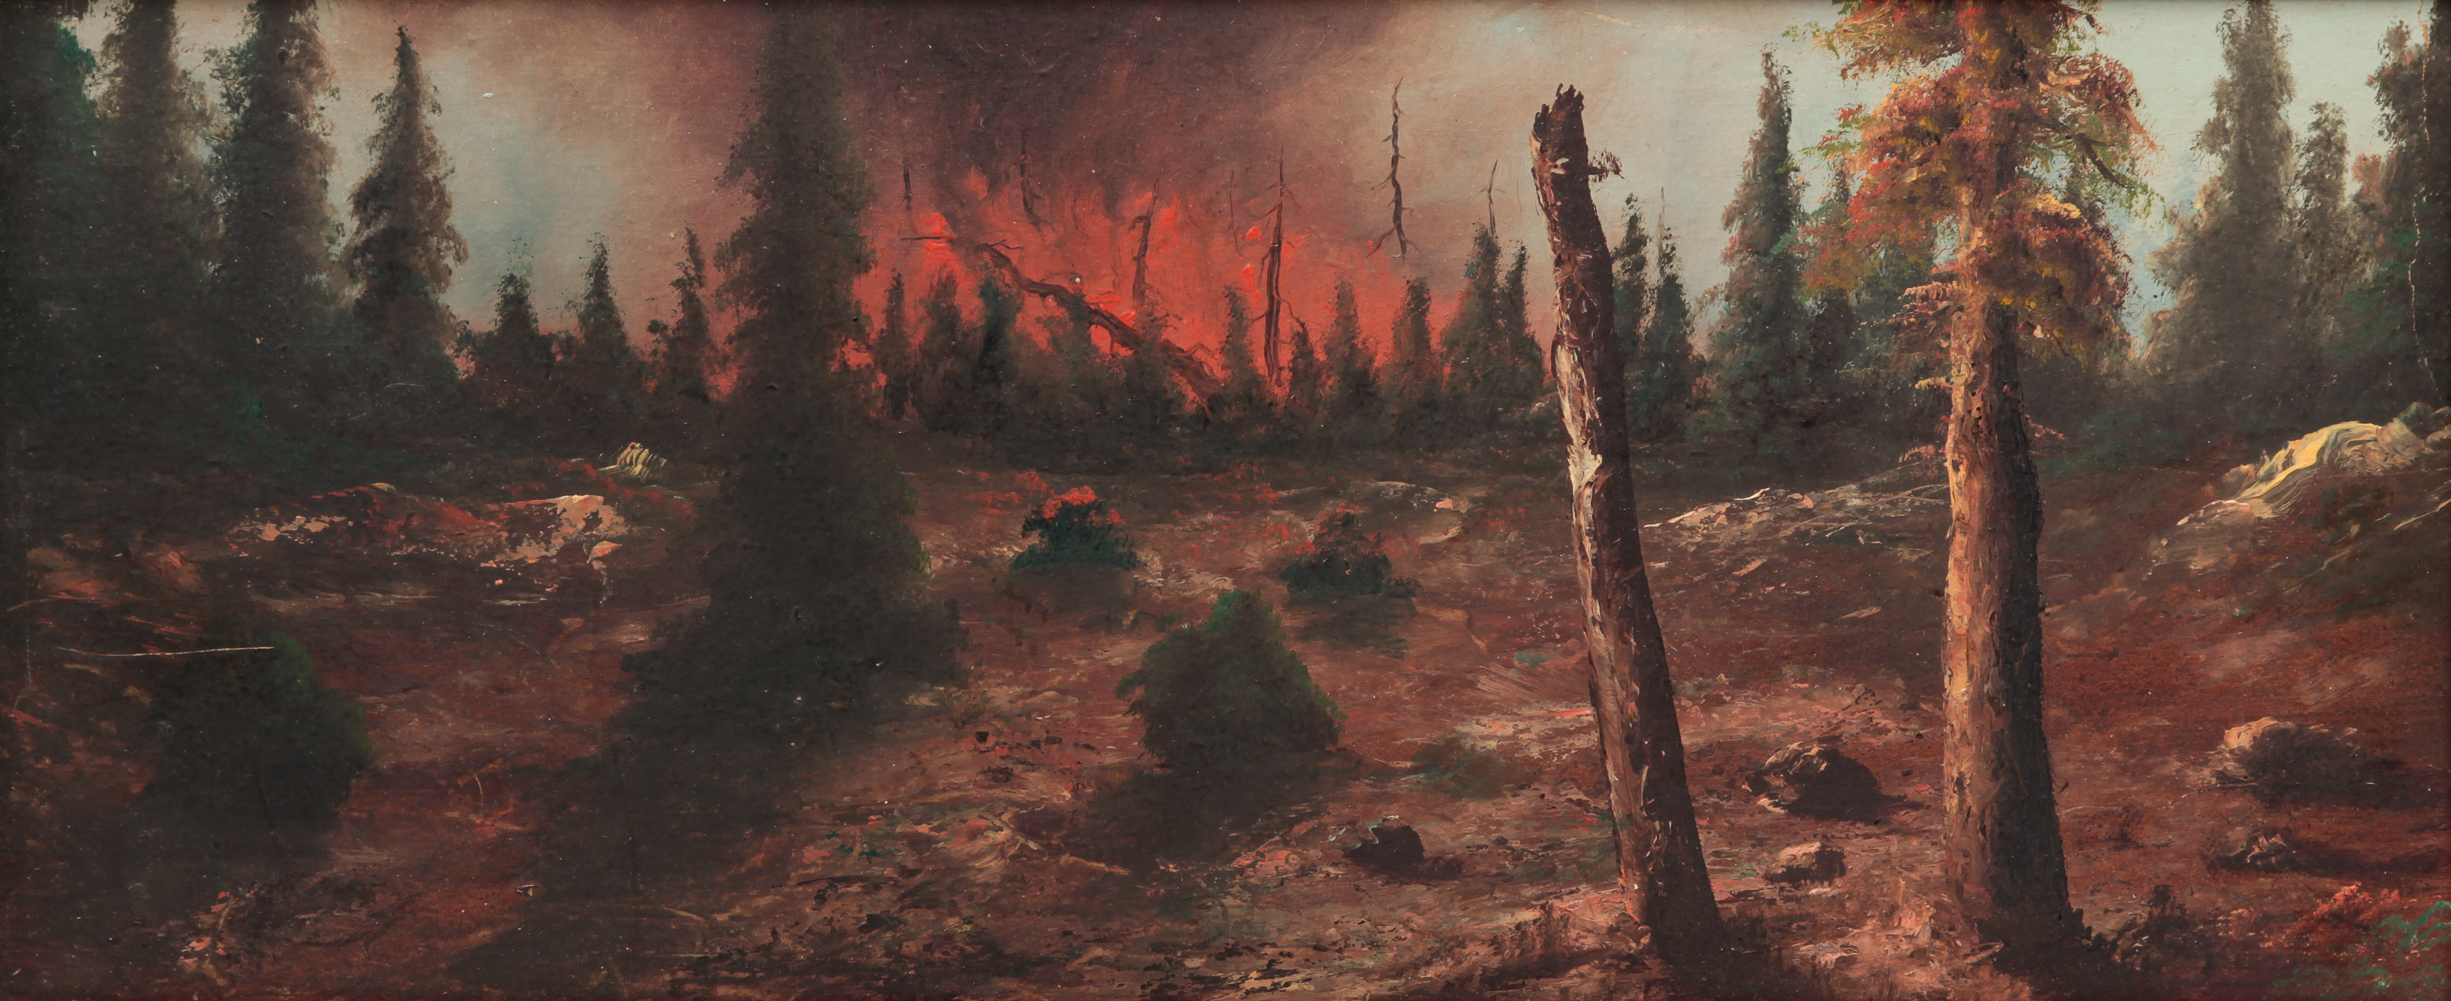 PAINTING OF A FOREST FIRE American 2dfa7b